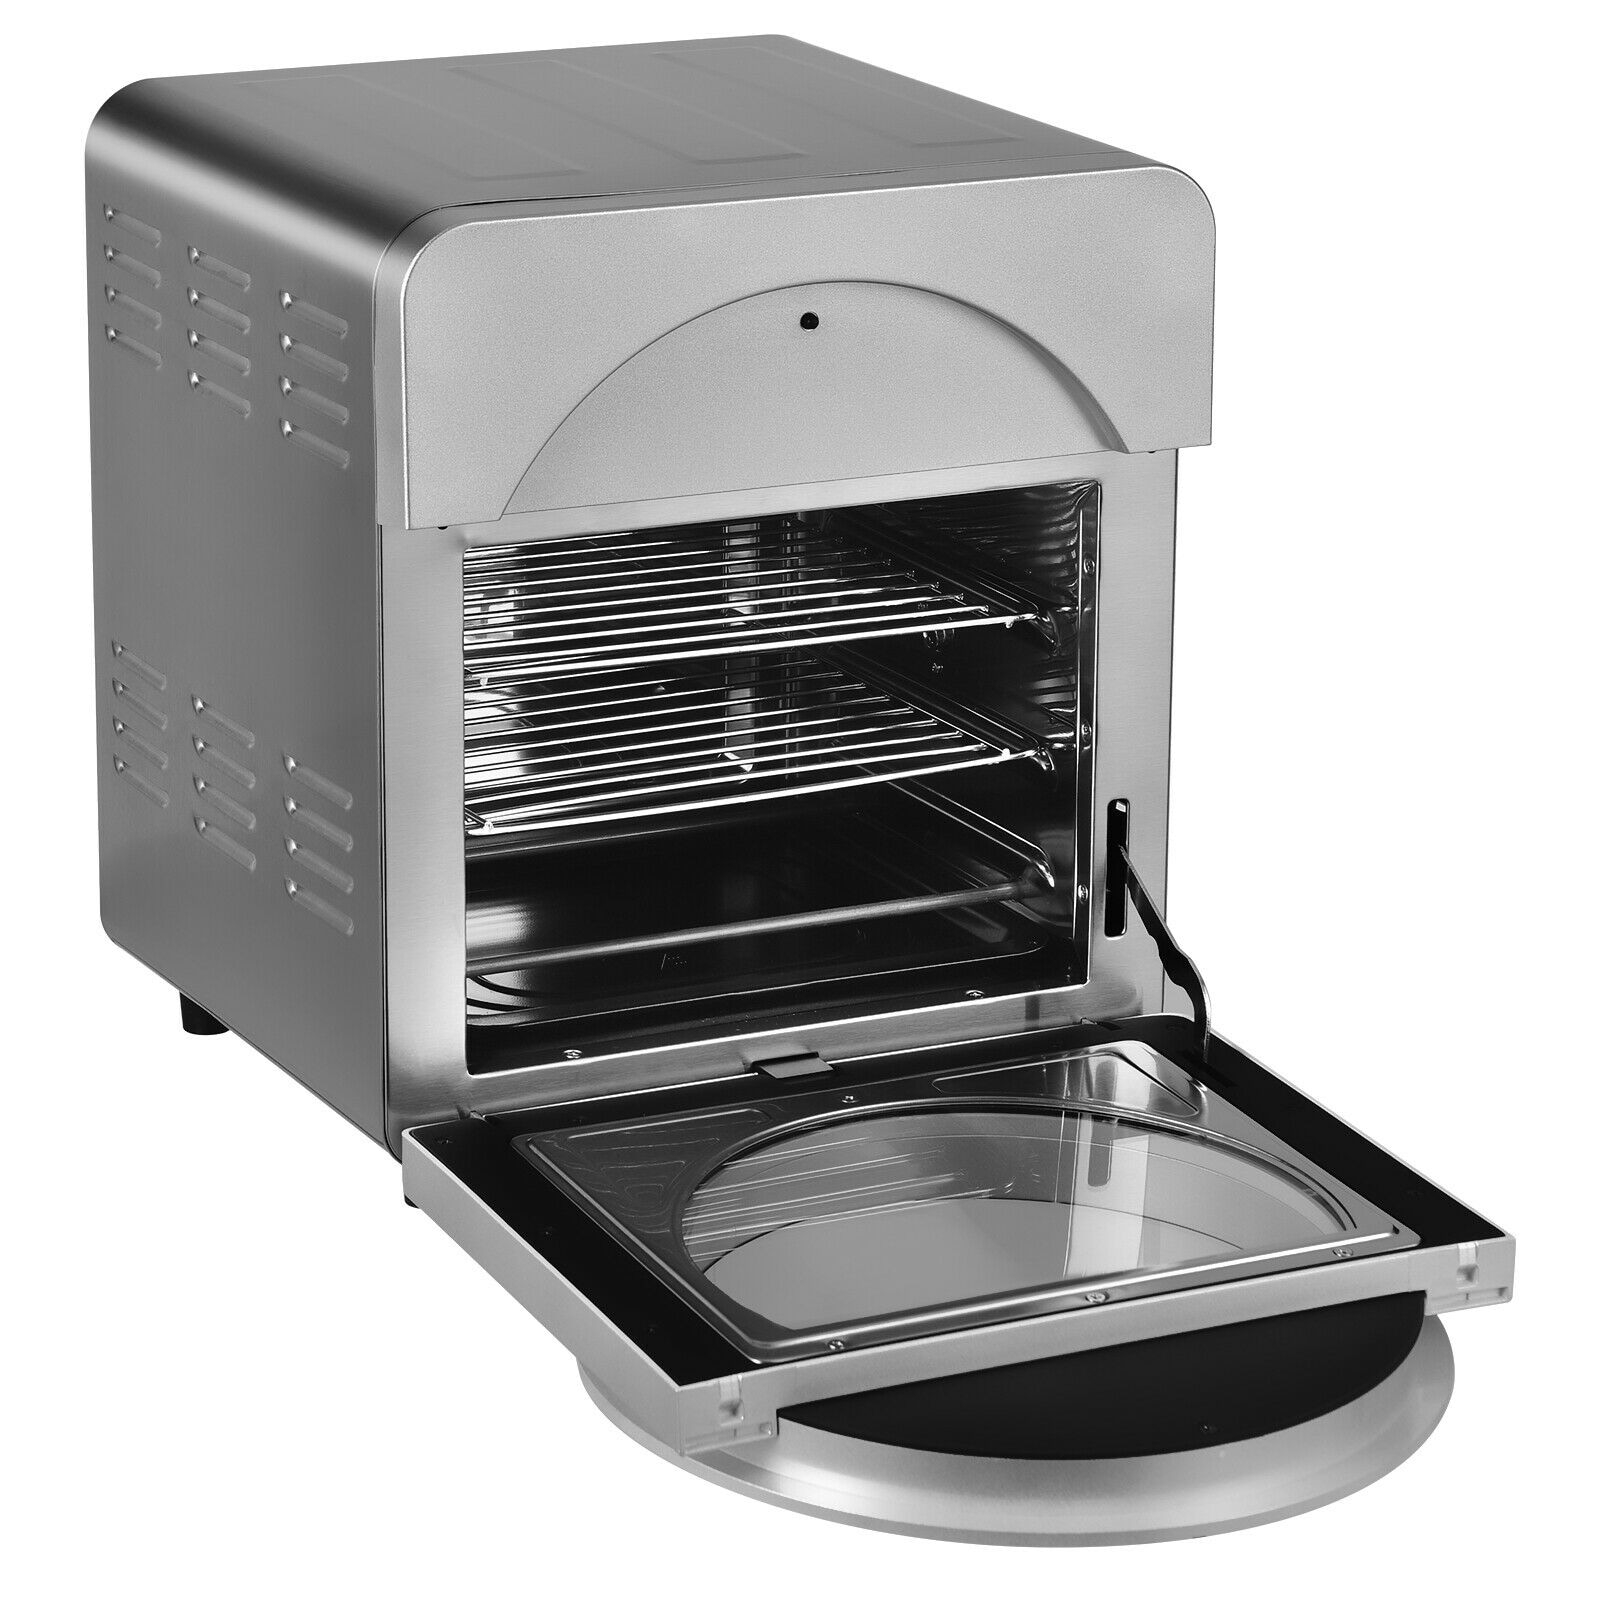 Home 19qt Countertop Convection Toaster Oven Air Fryer Combo Included Rotisserie Rack White, Size: 1 Pack, Silver